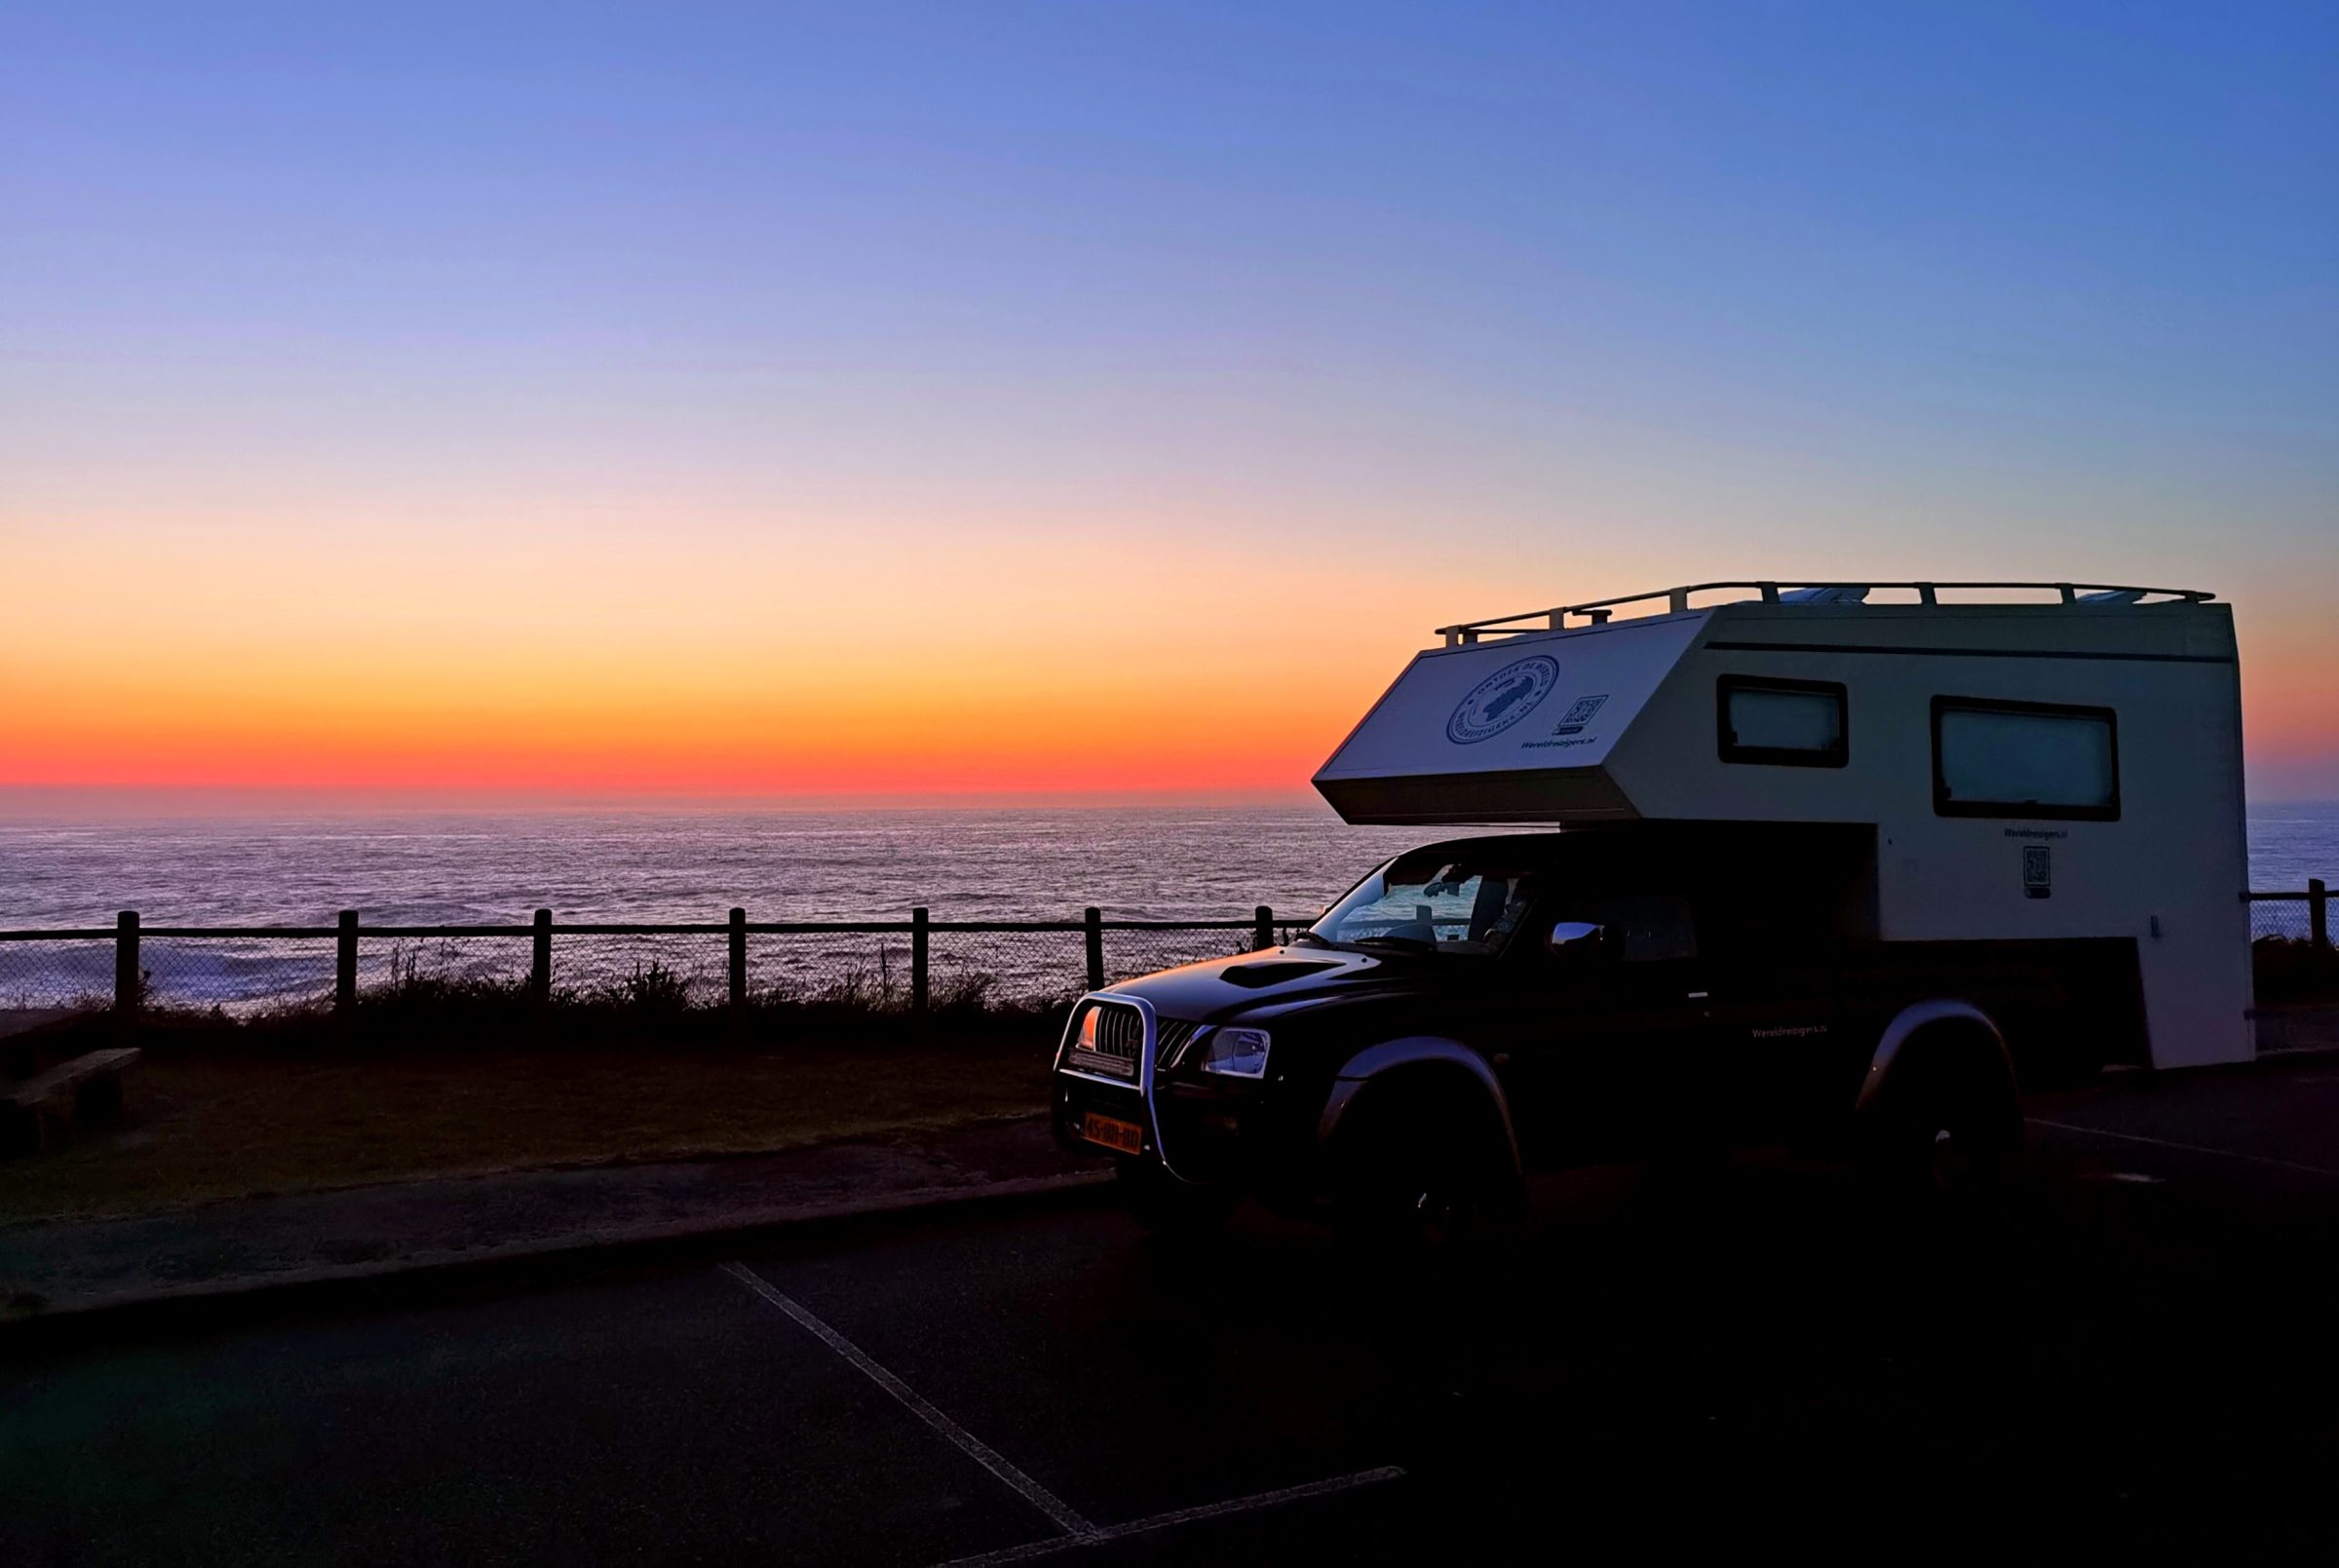 Wild camping spot | Boiler Bay State Scenic Viewpoint, Oregon